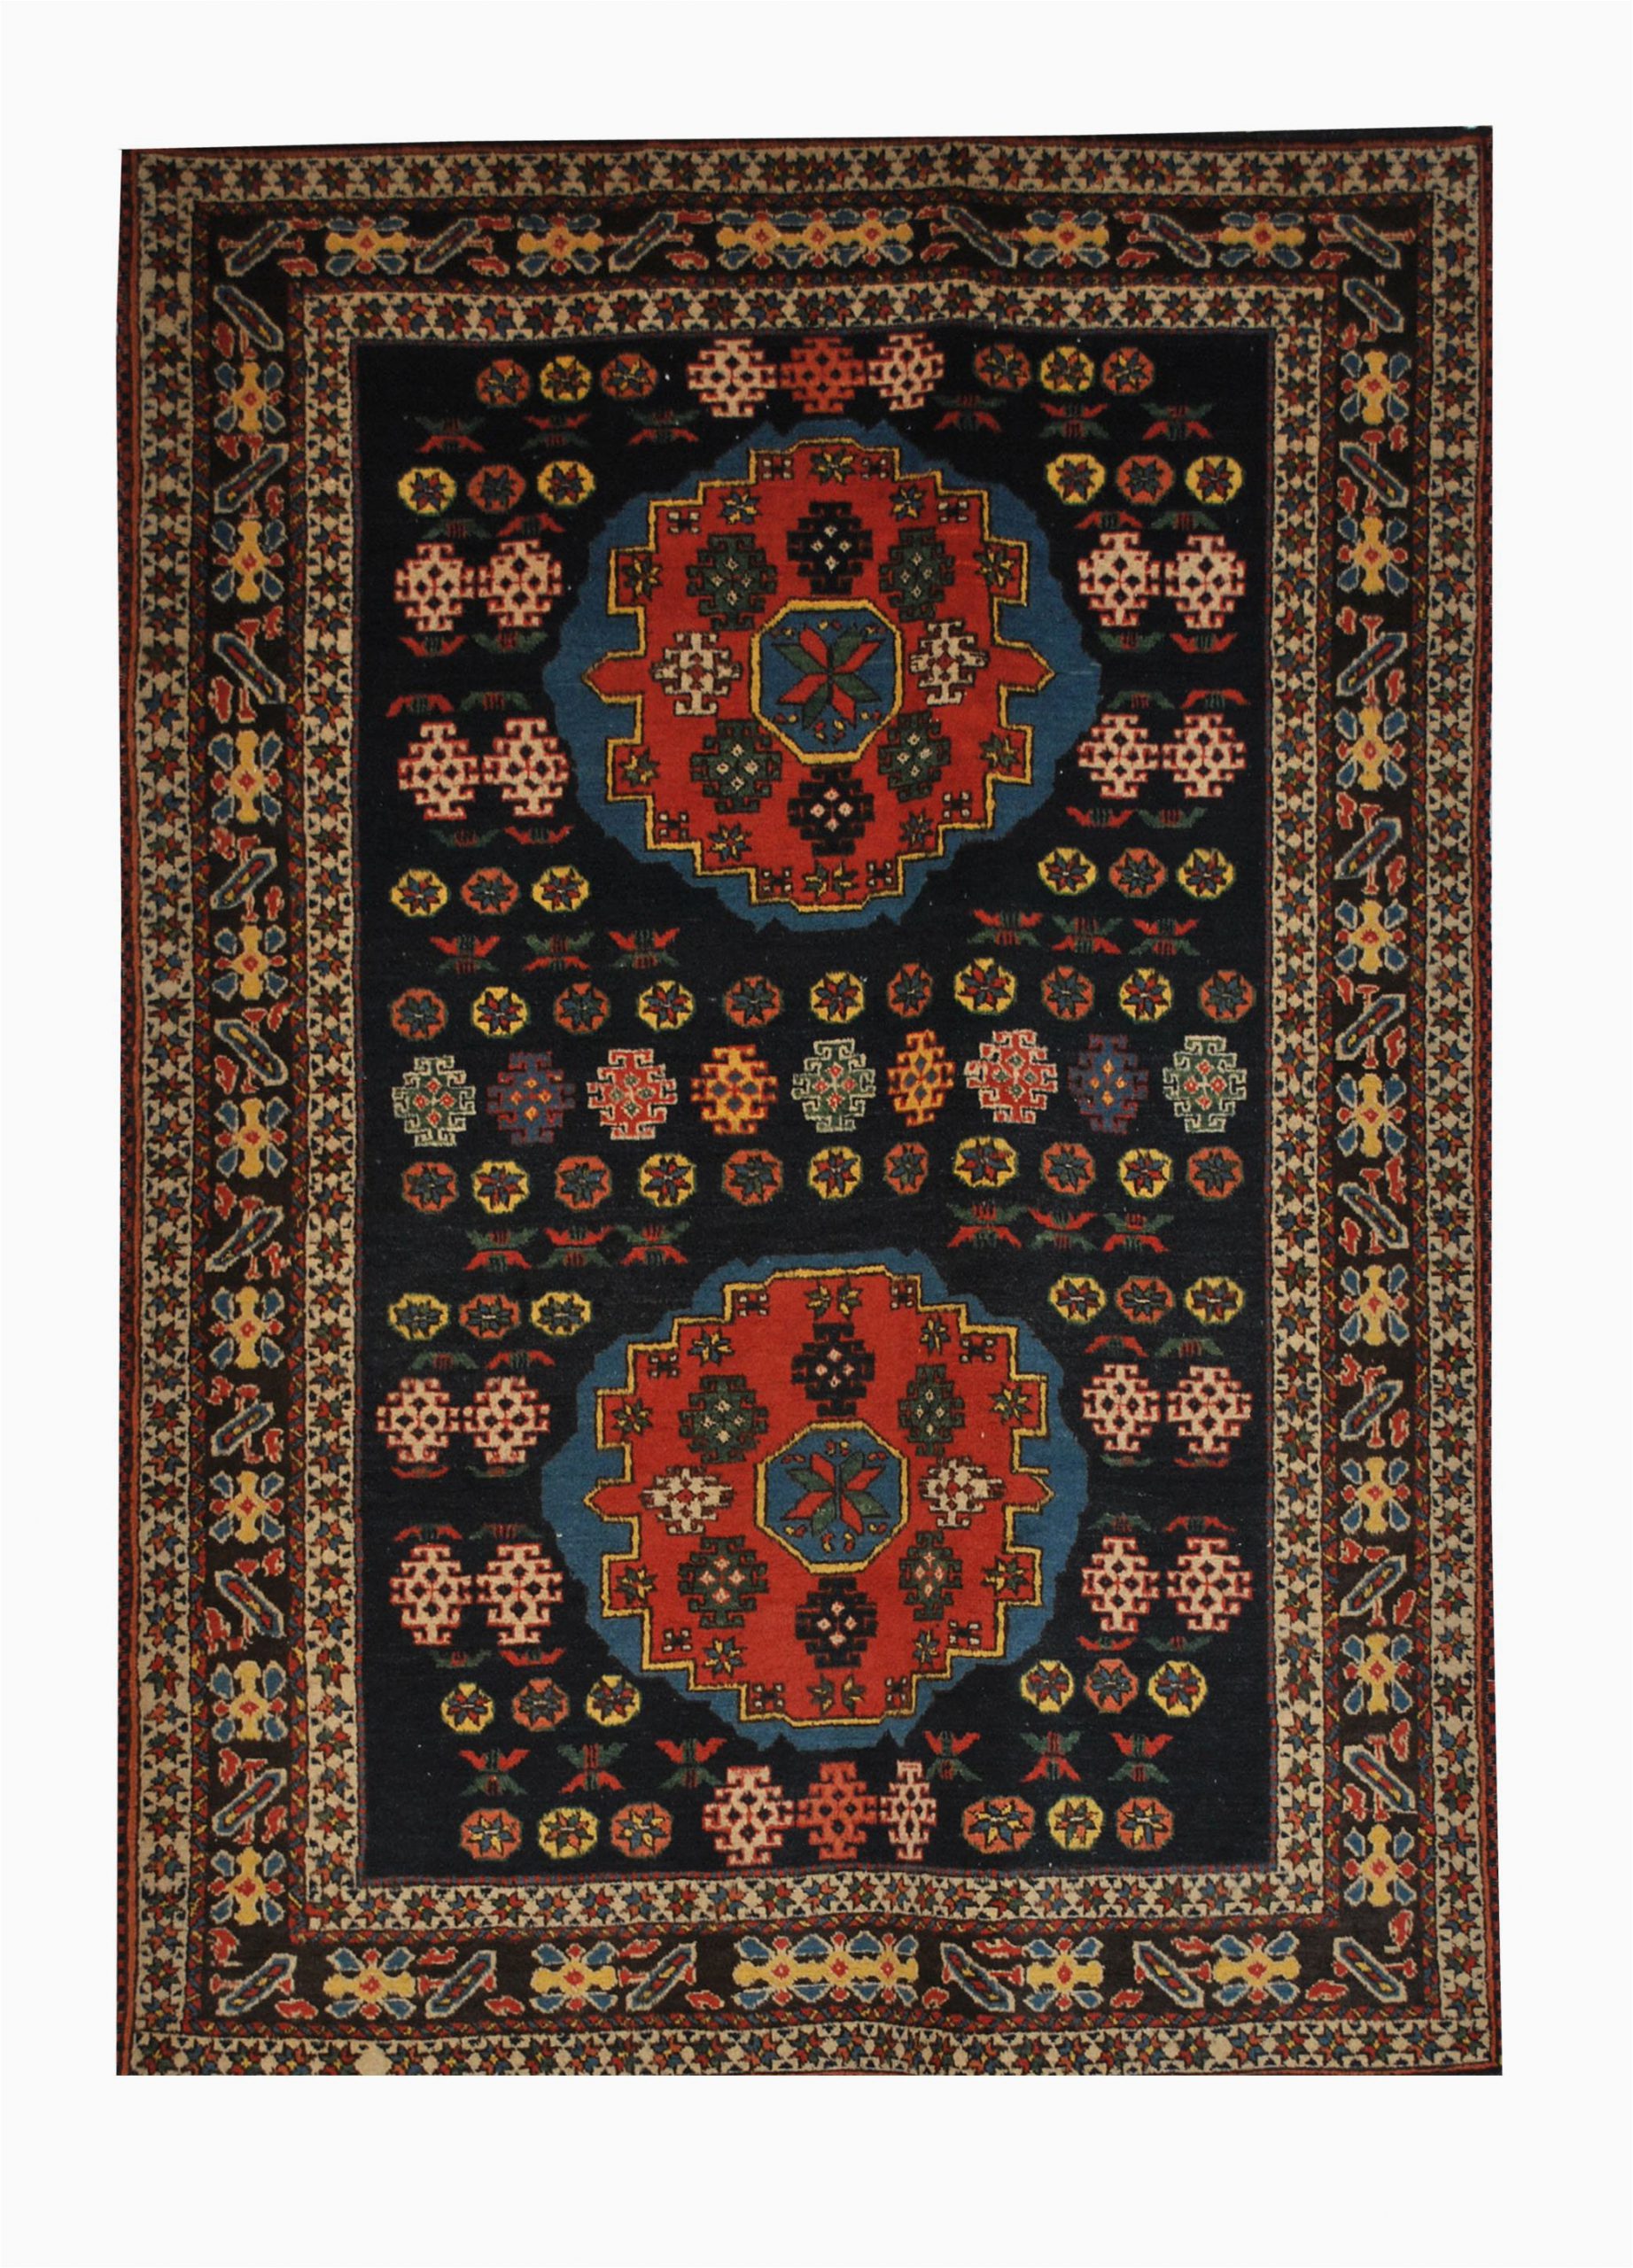 4 by 5 area Rugs Caucasion 4 8" X 6 5" Handmade area Rug